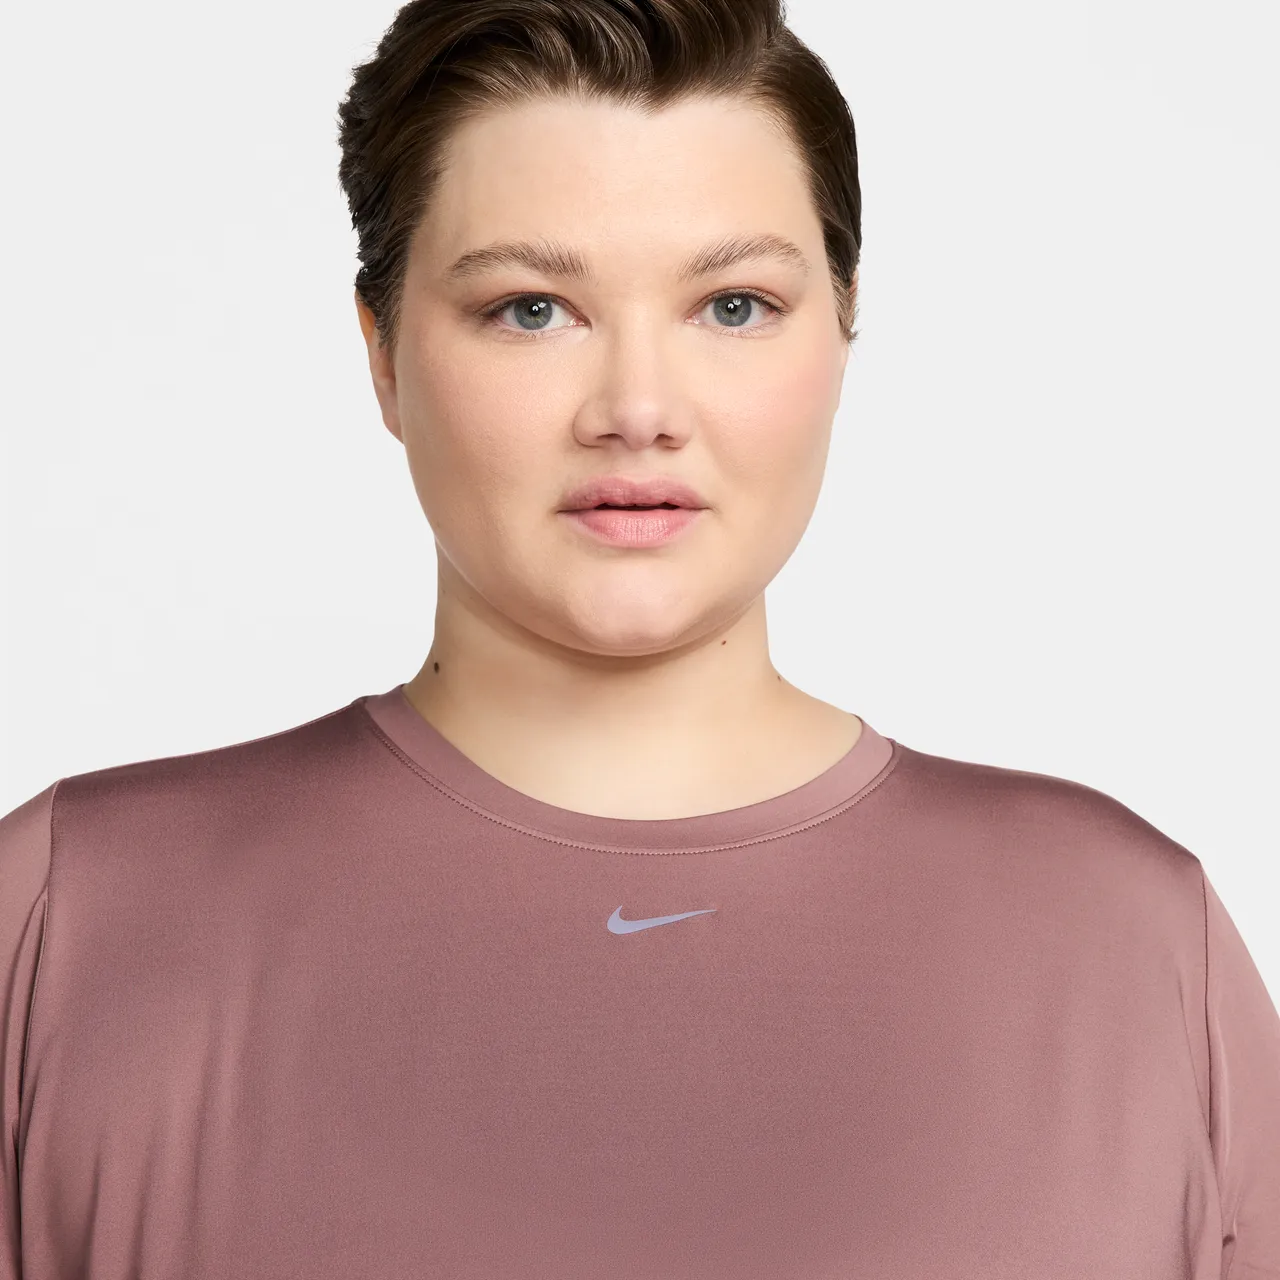 Nike One Classic Women's Dri-FIT Short-Sleeve Top - Purple - Polyester